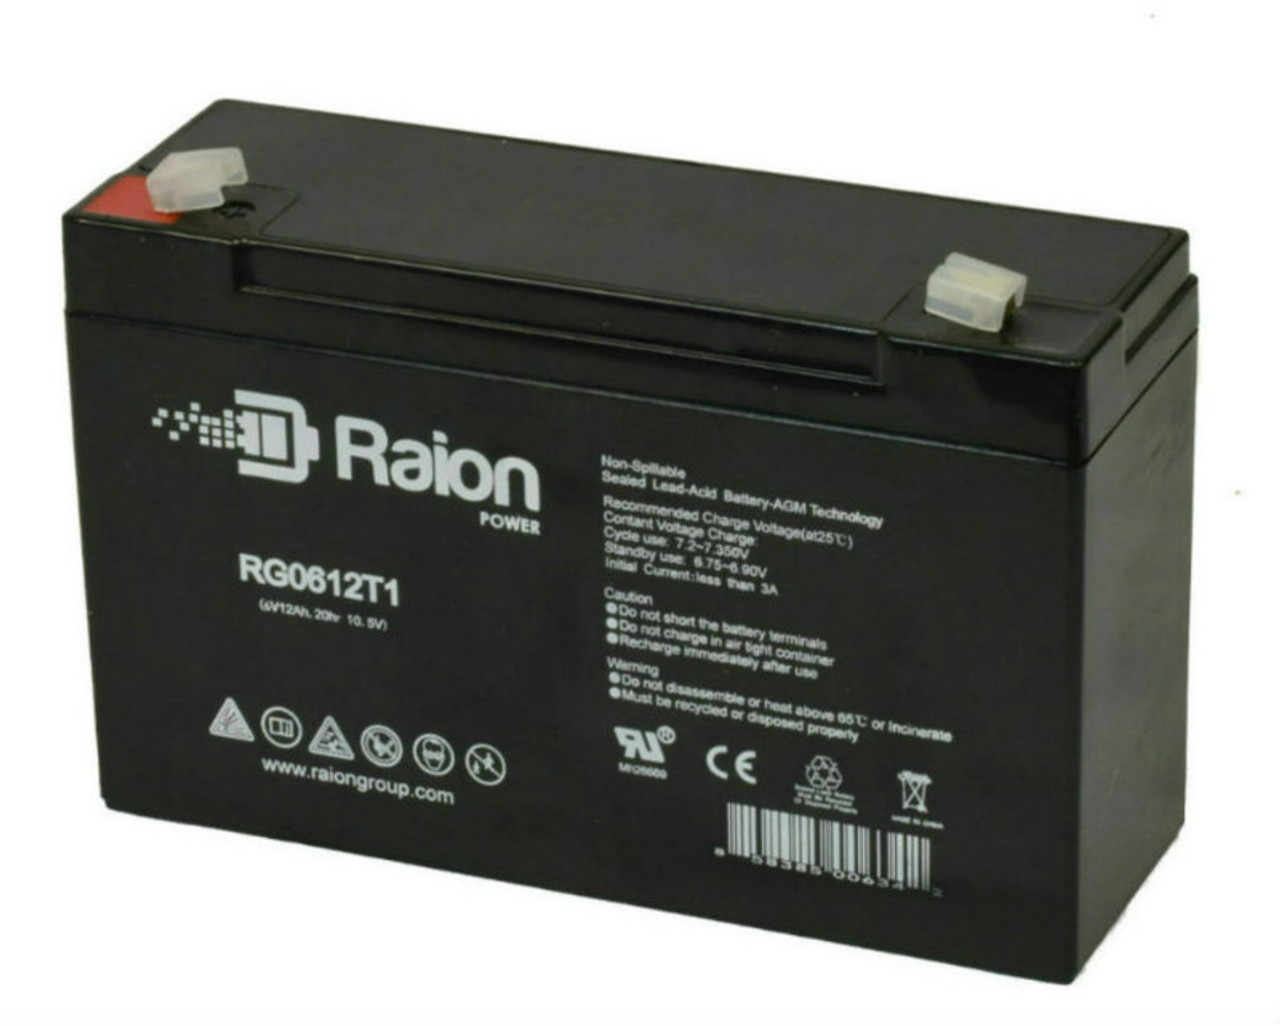 Raion Power RG06120T1 Replacement Battery for Power Patrol BSL0955